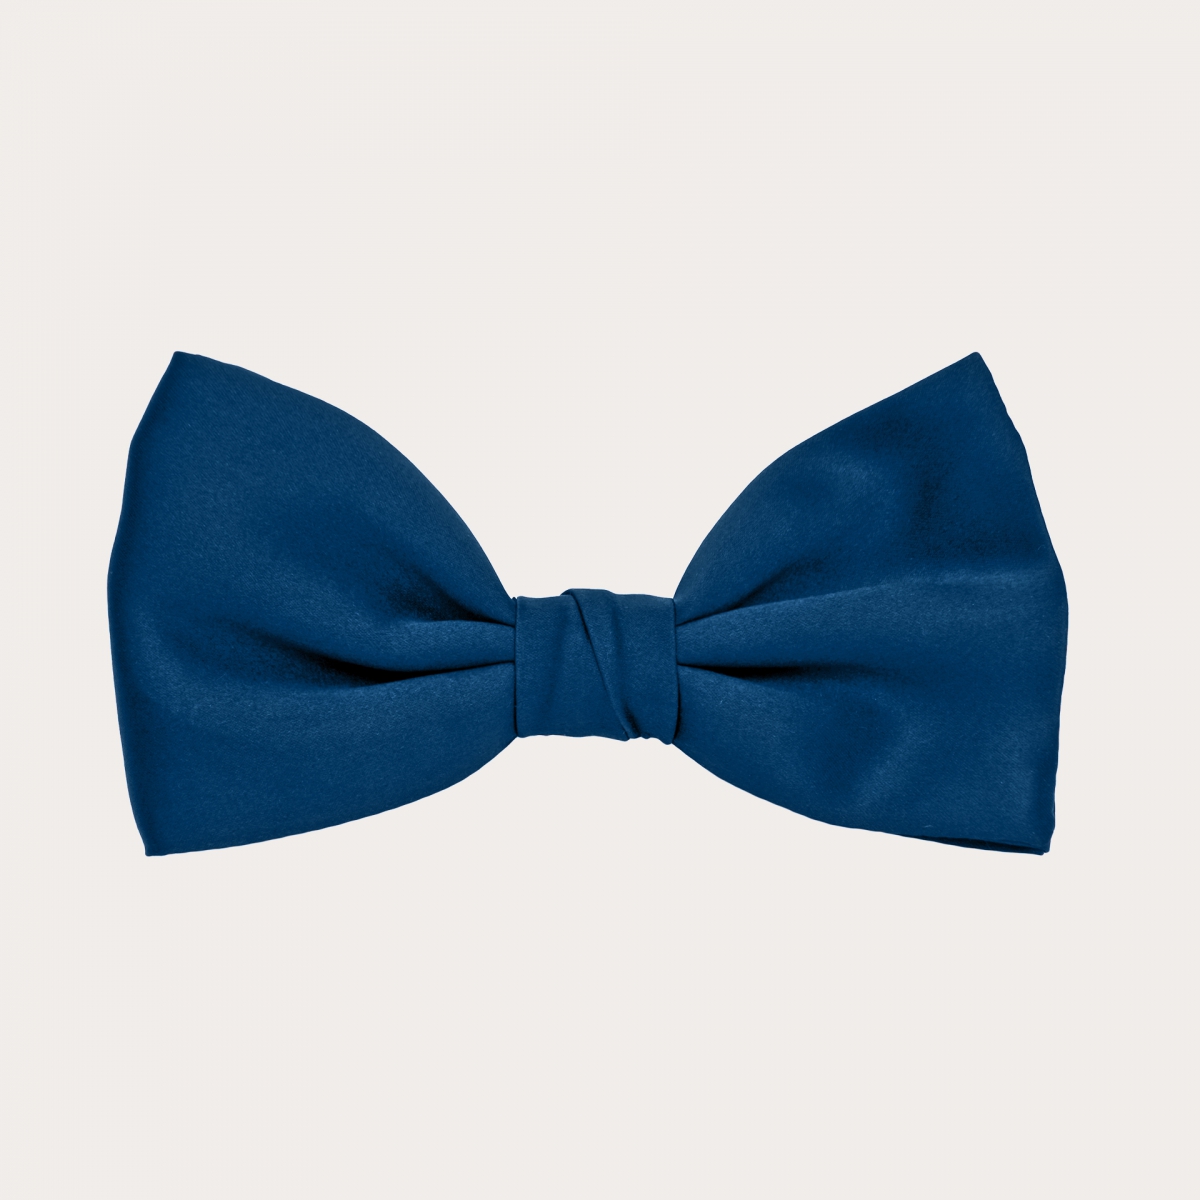 BRUCLE Classic bow tie in silk satin, blue